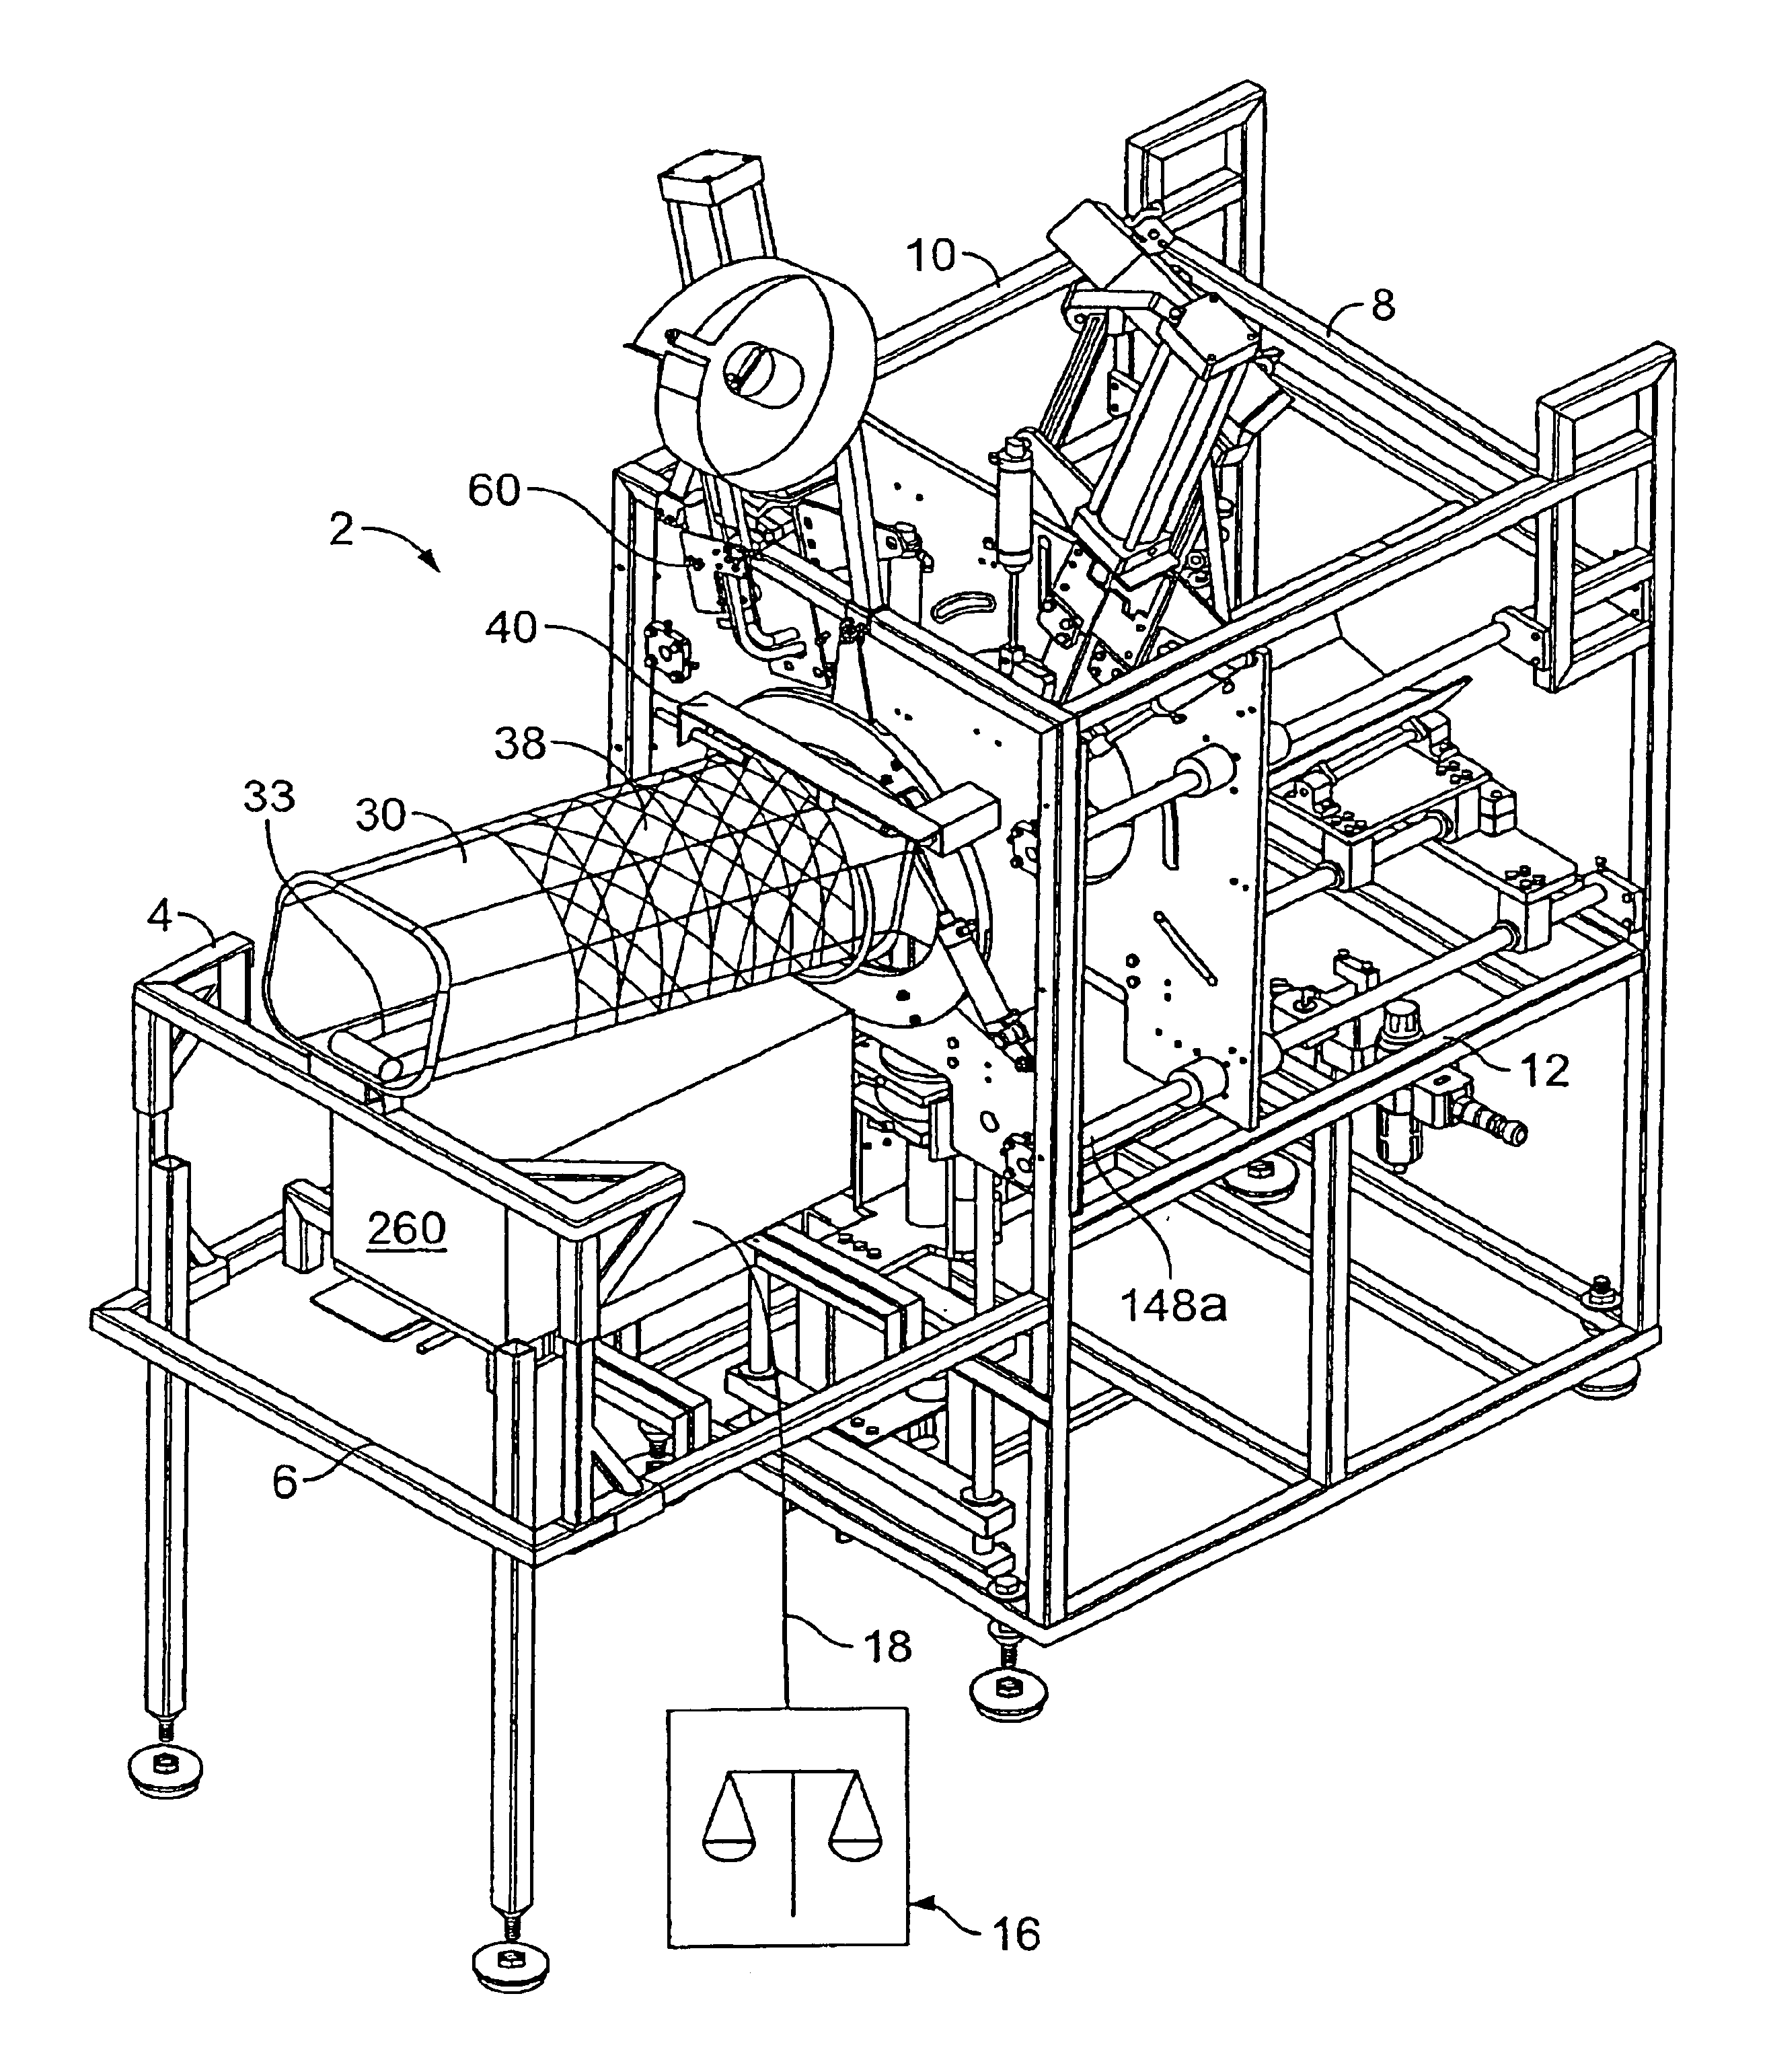 Apparatus for enclosing material in a net